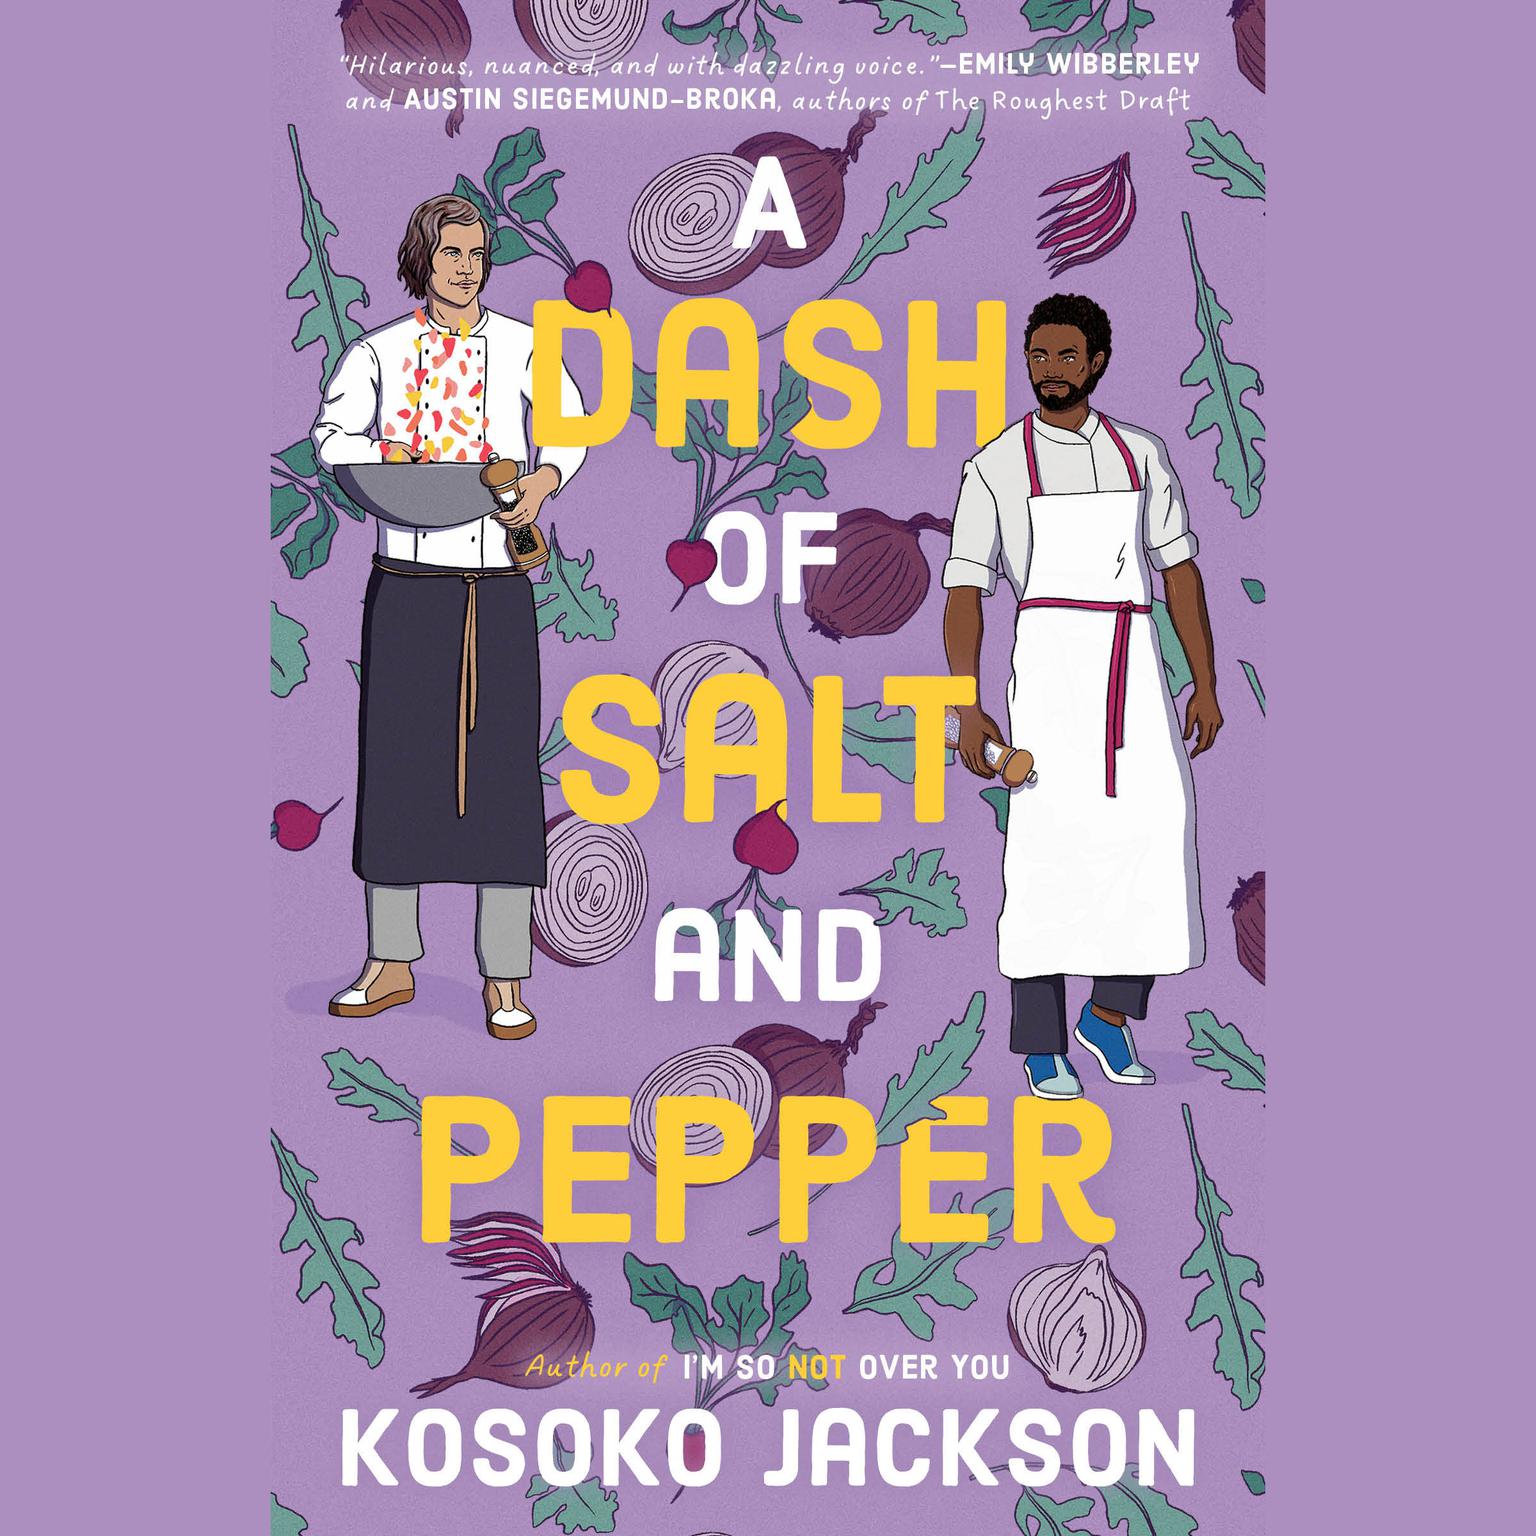 A Dash of Salt and Pepper Audiobook, by Kosoko Jackson